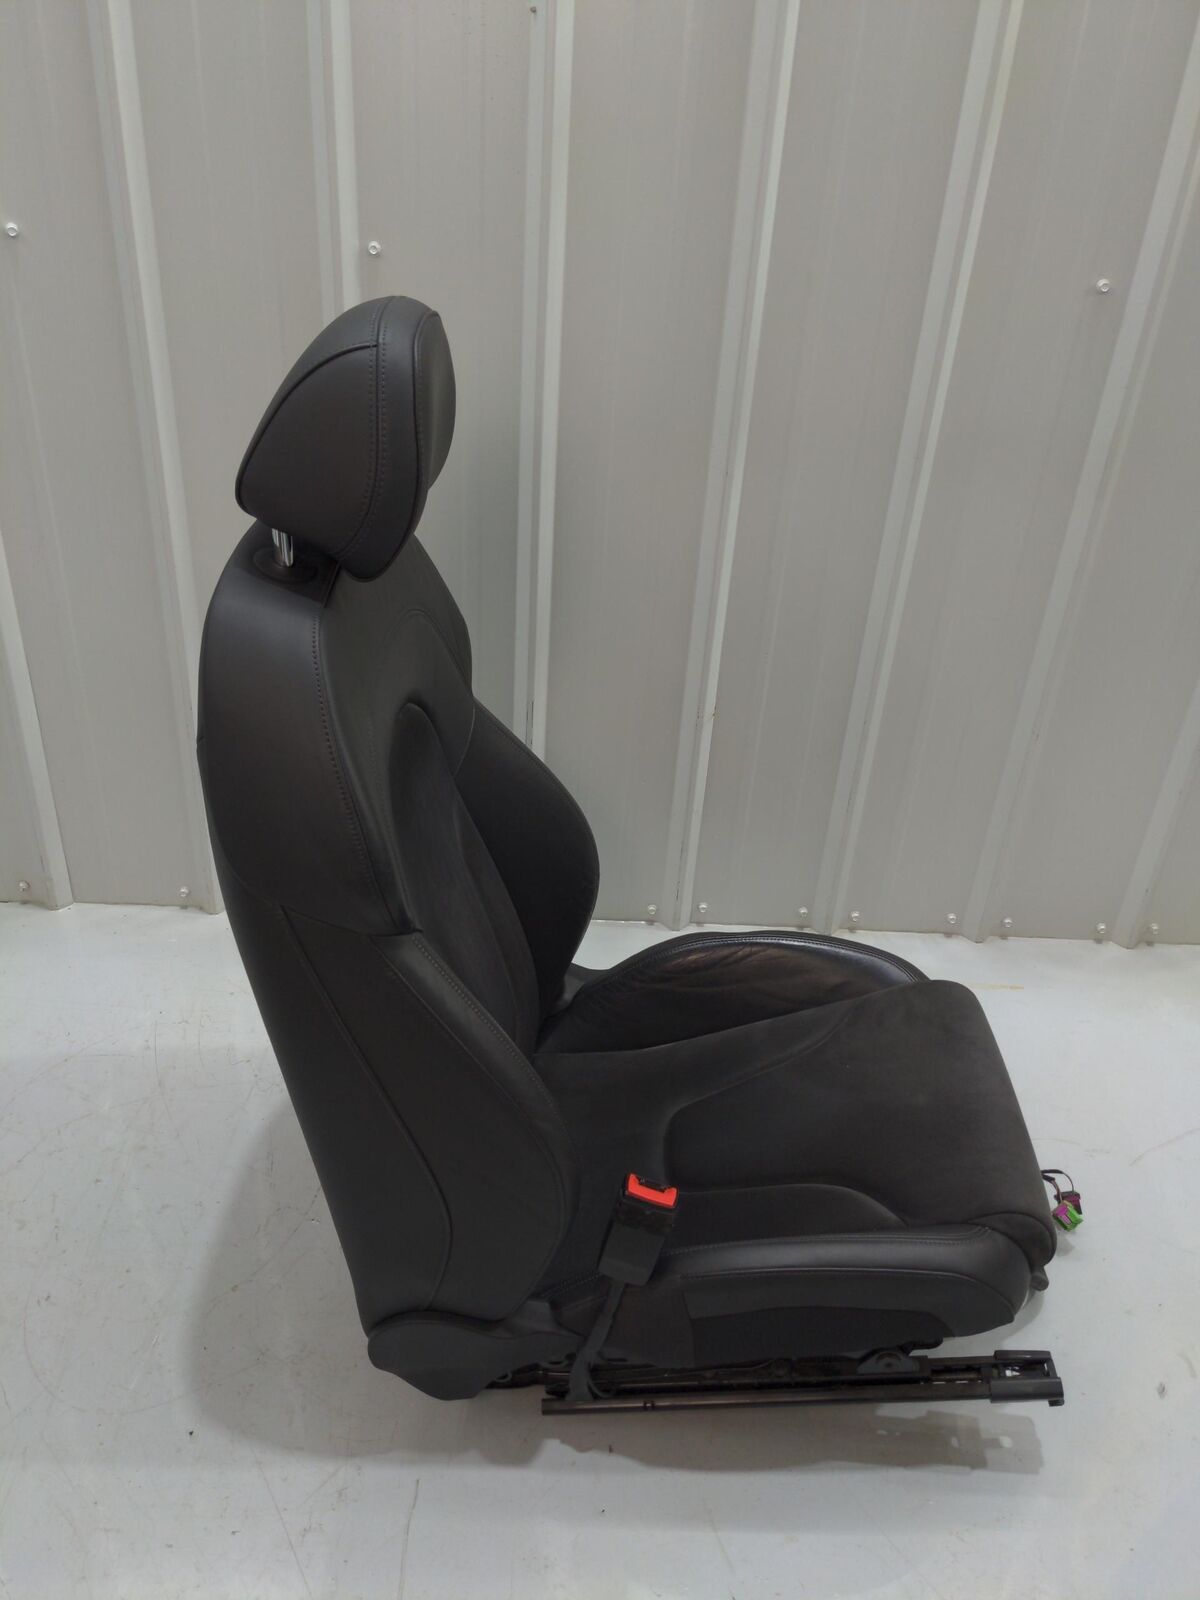 08-10 AUDI R8 Front Seat Lh Left Driver Black *outer Bolsters Has Wear* 54K KM'S